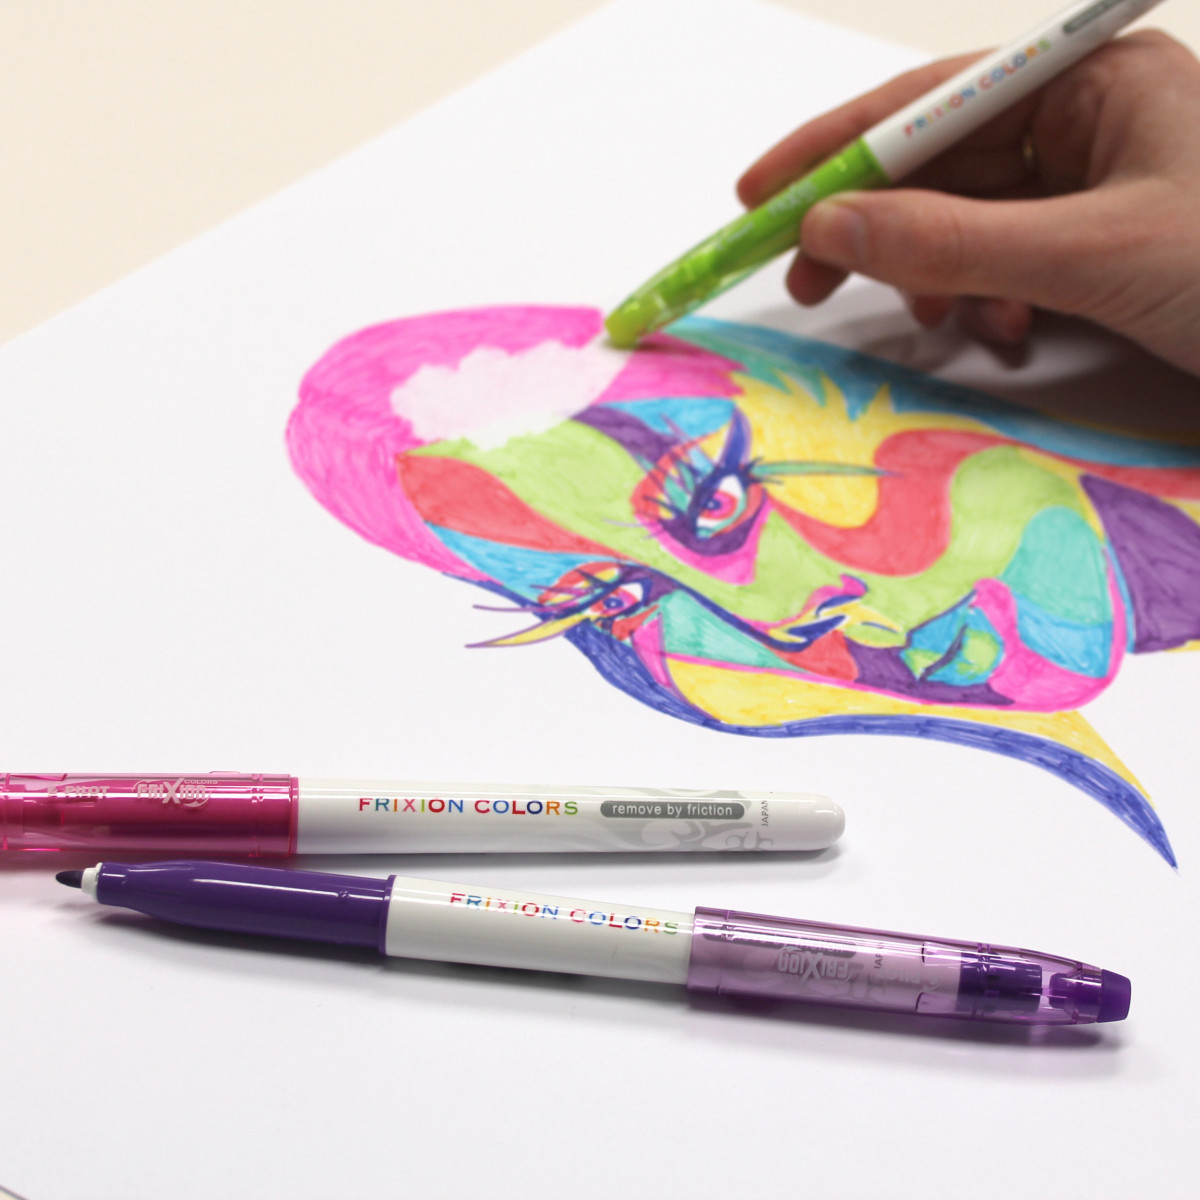 Artistic drawing with vibrant erasable markers, showing vibrant colours of FriXion Colors Erasable Marker